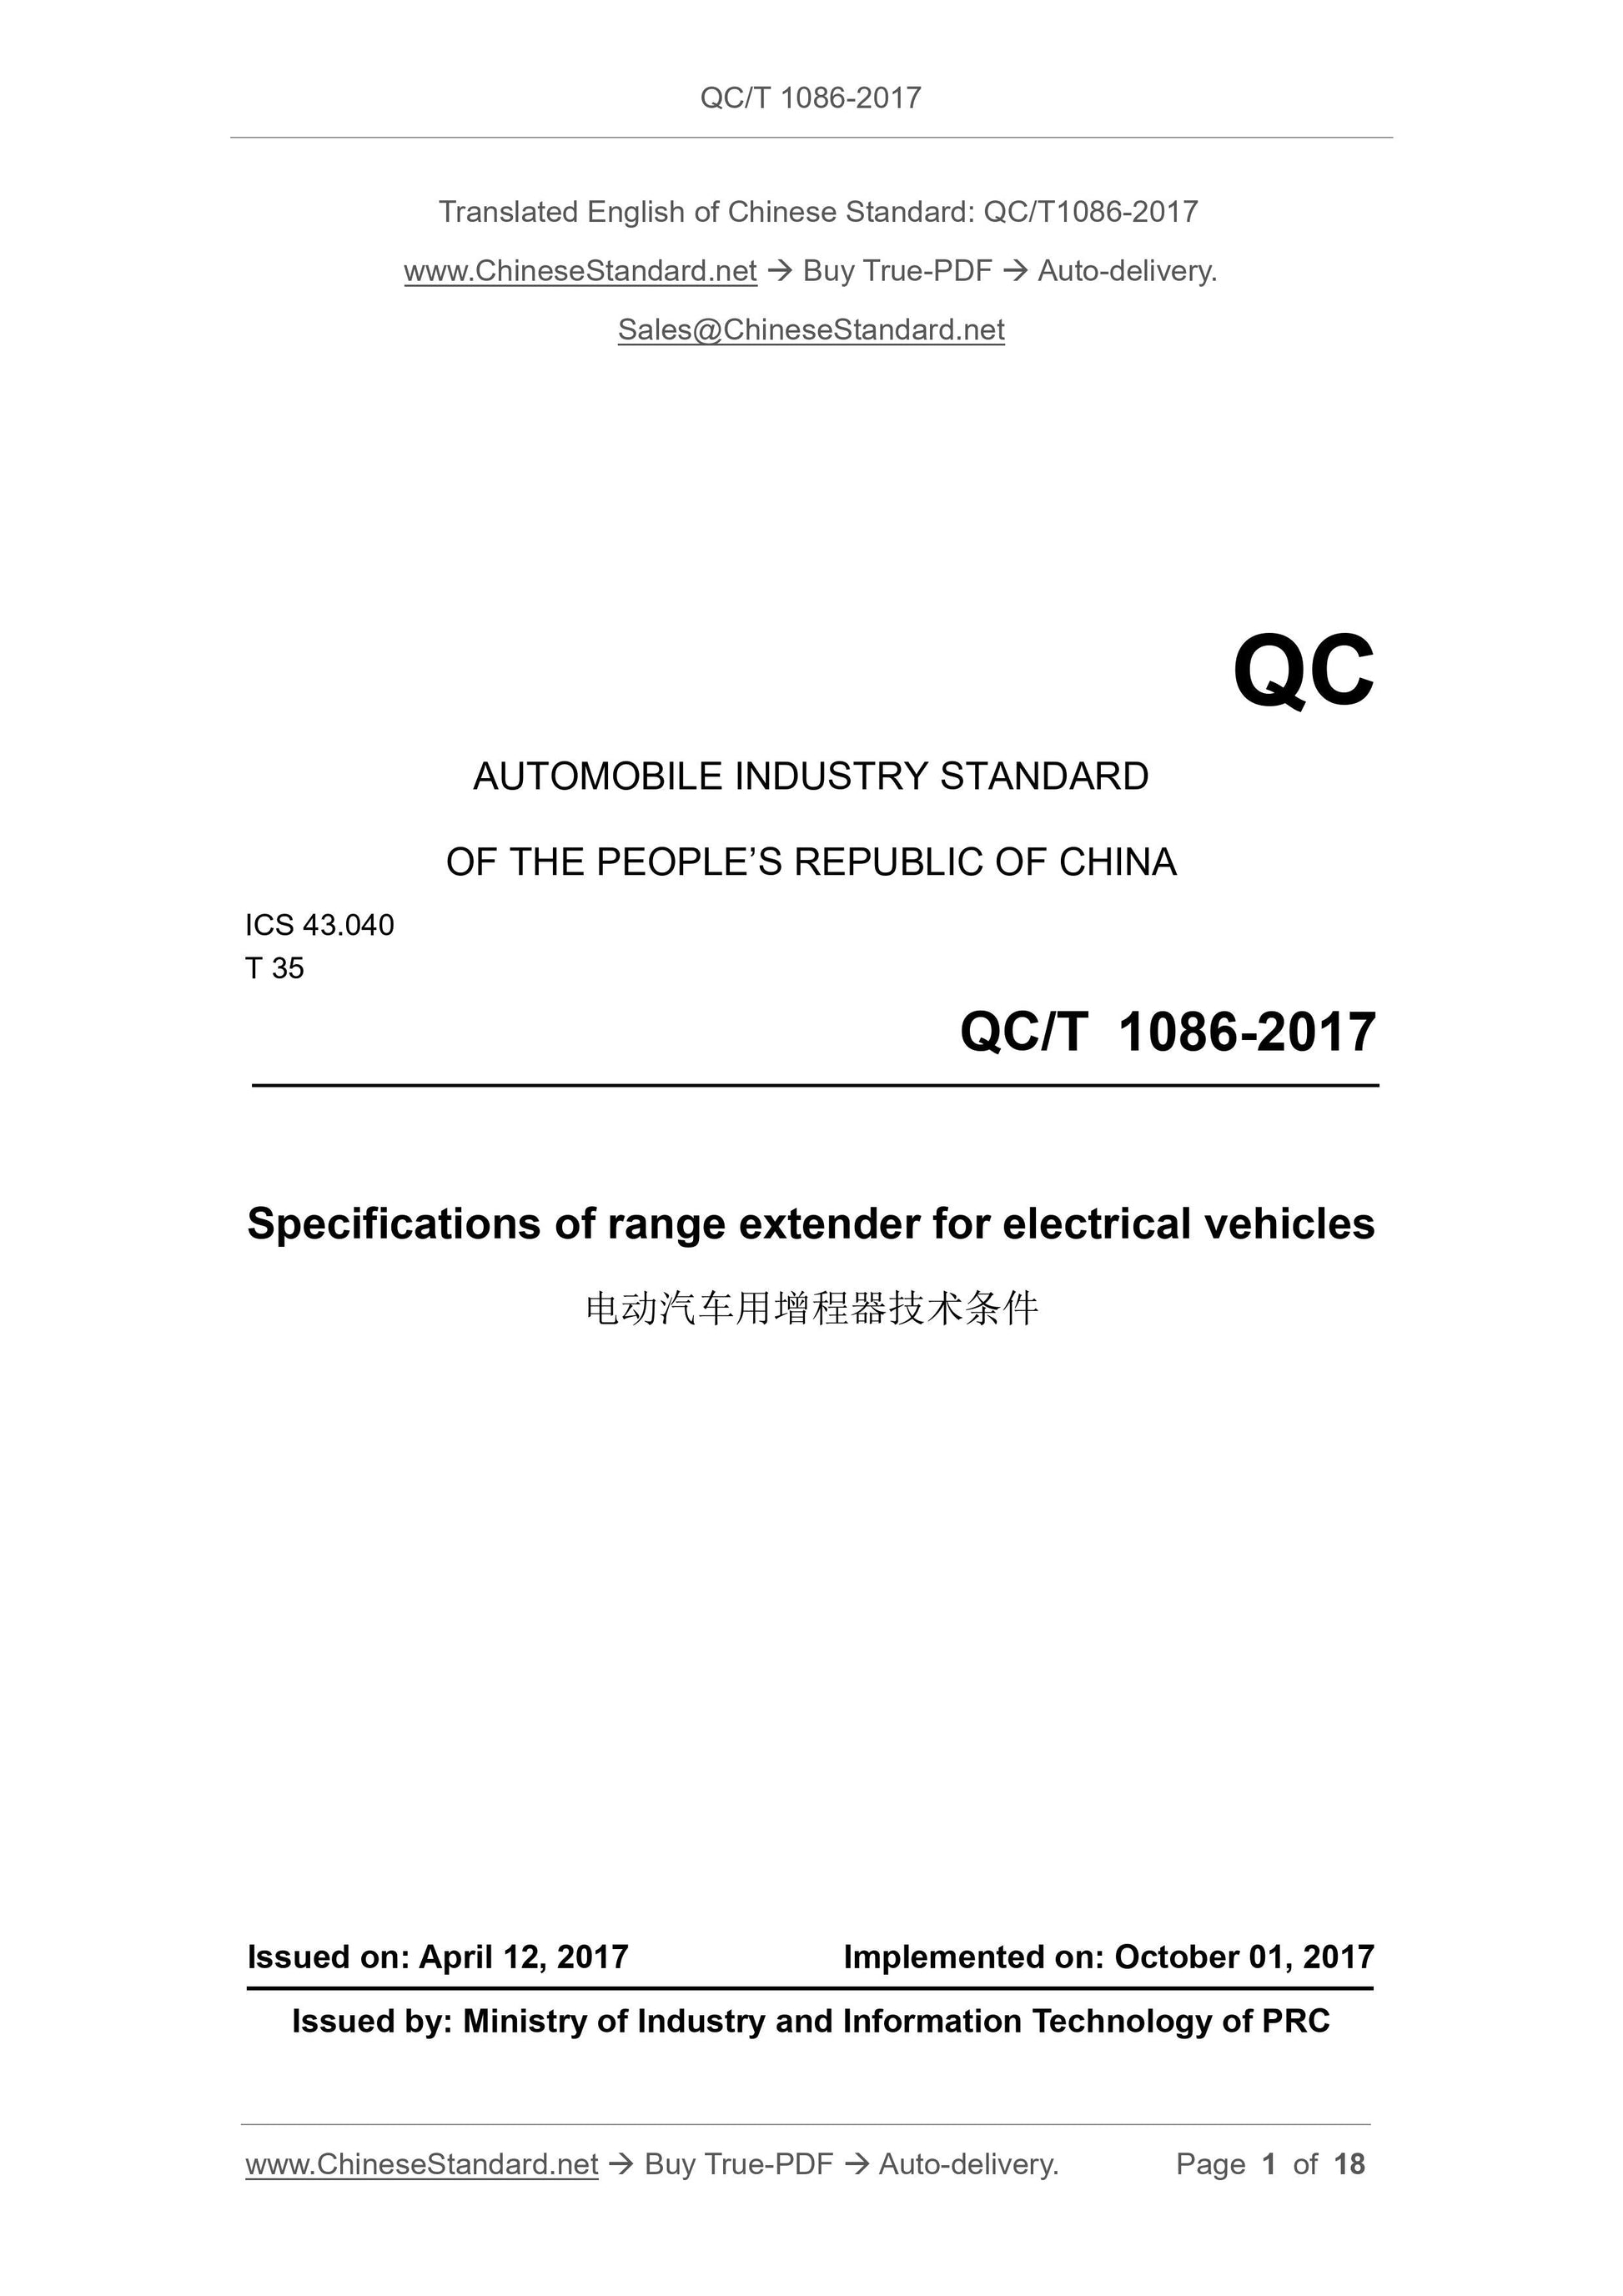 QC/T 1086-2017 Page 1